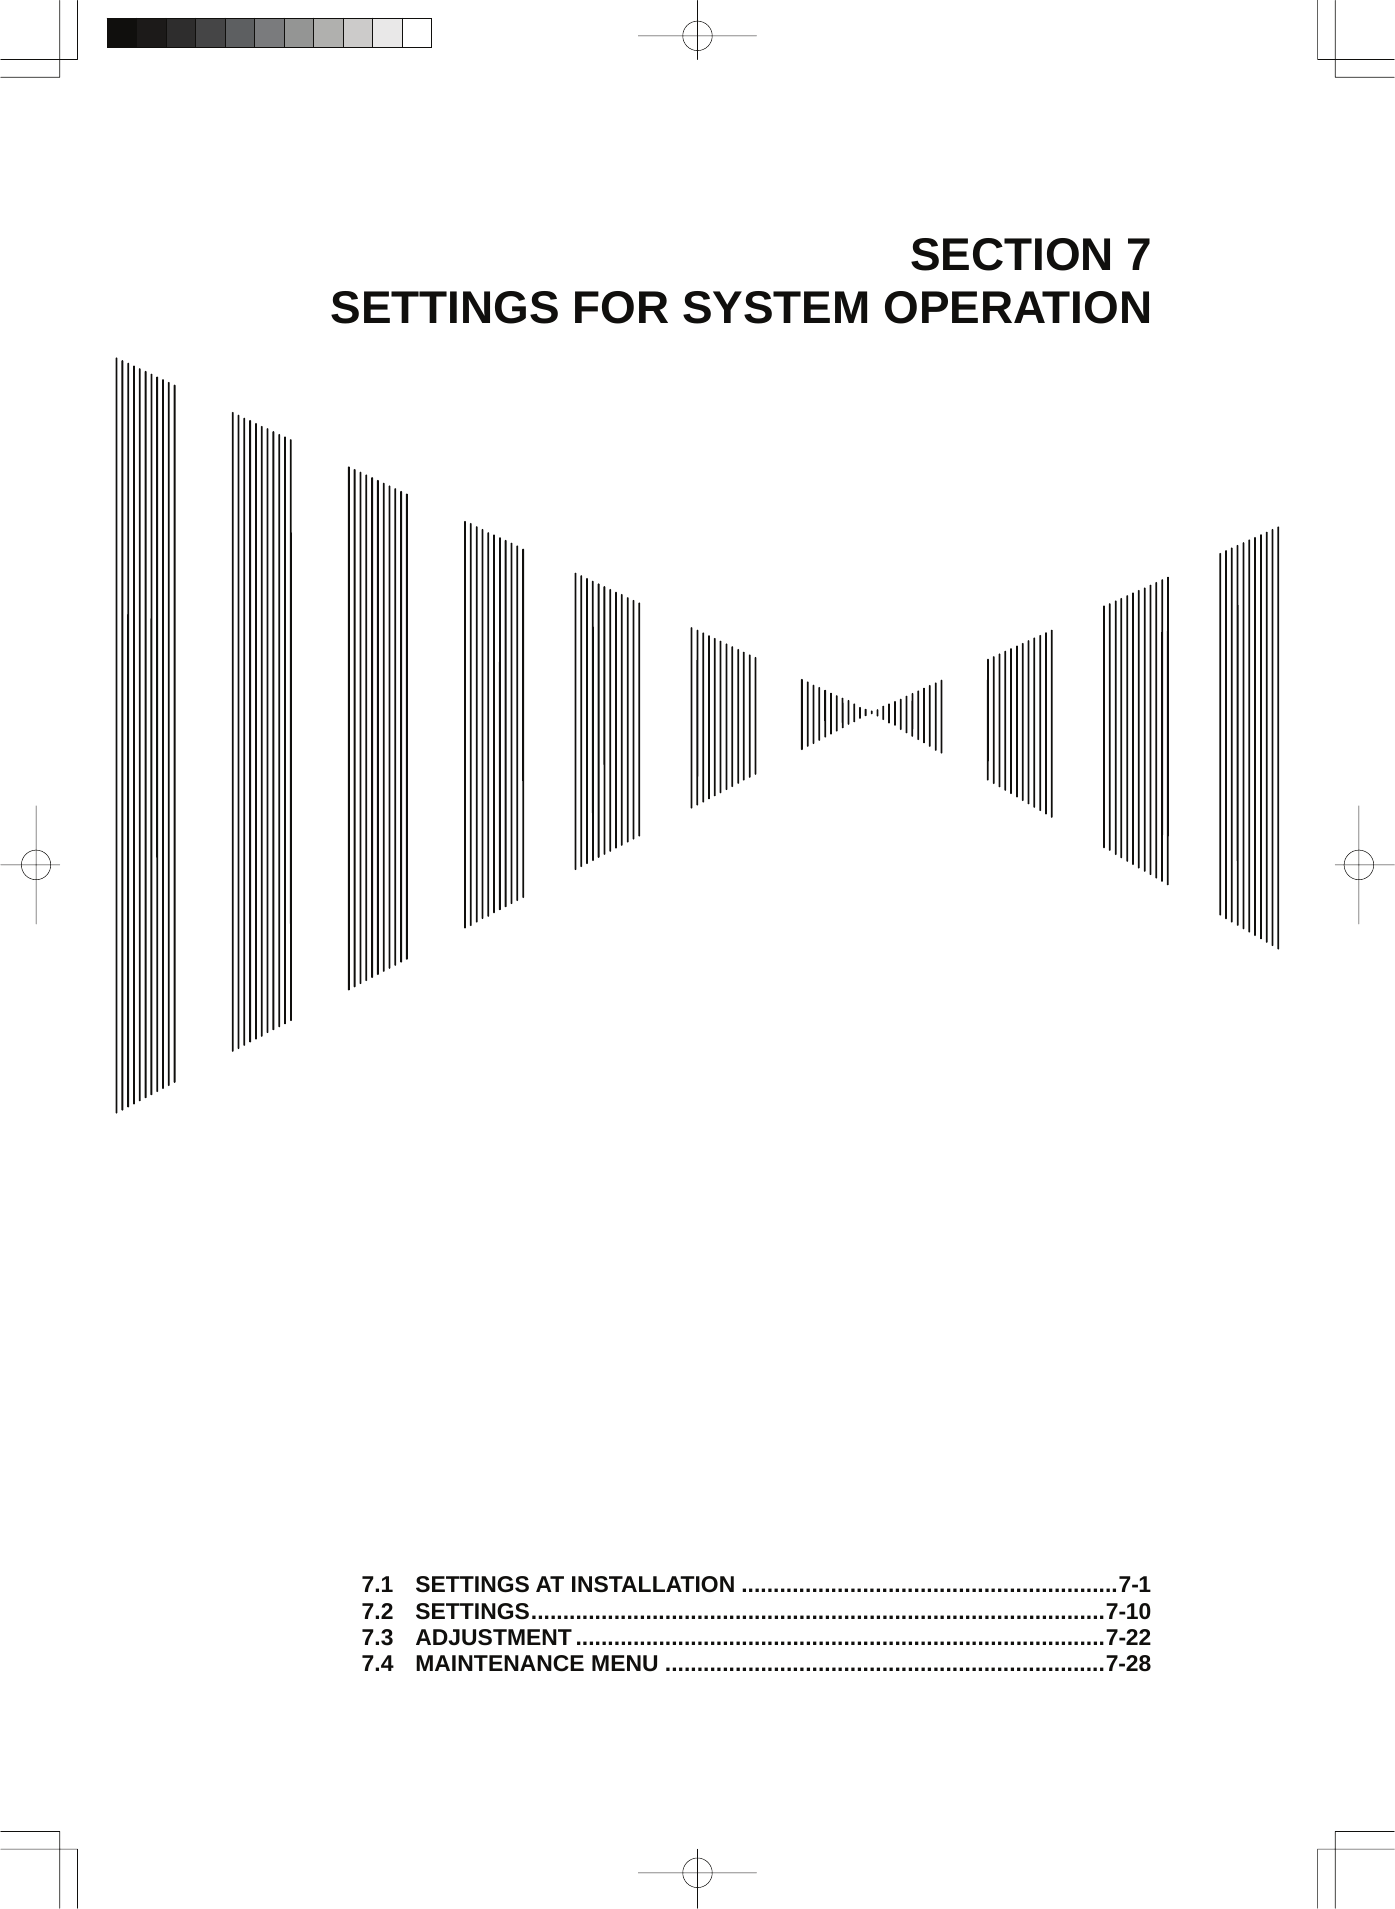  SECTION 7 SETTINGS FOR SYSTEM OPERATION                                              7.1 SETTINGS AT INSTALLATION ...........................................................7-1 7.2 SETTINGS..........................................................................................7-10 7.3 ADJUSTMENT...................................................................................7-22 7.4 MAINTENANCE MENU .....................................................................7-28 